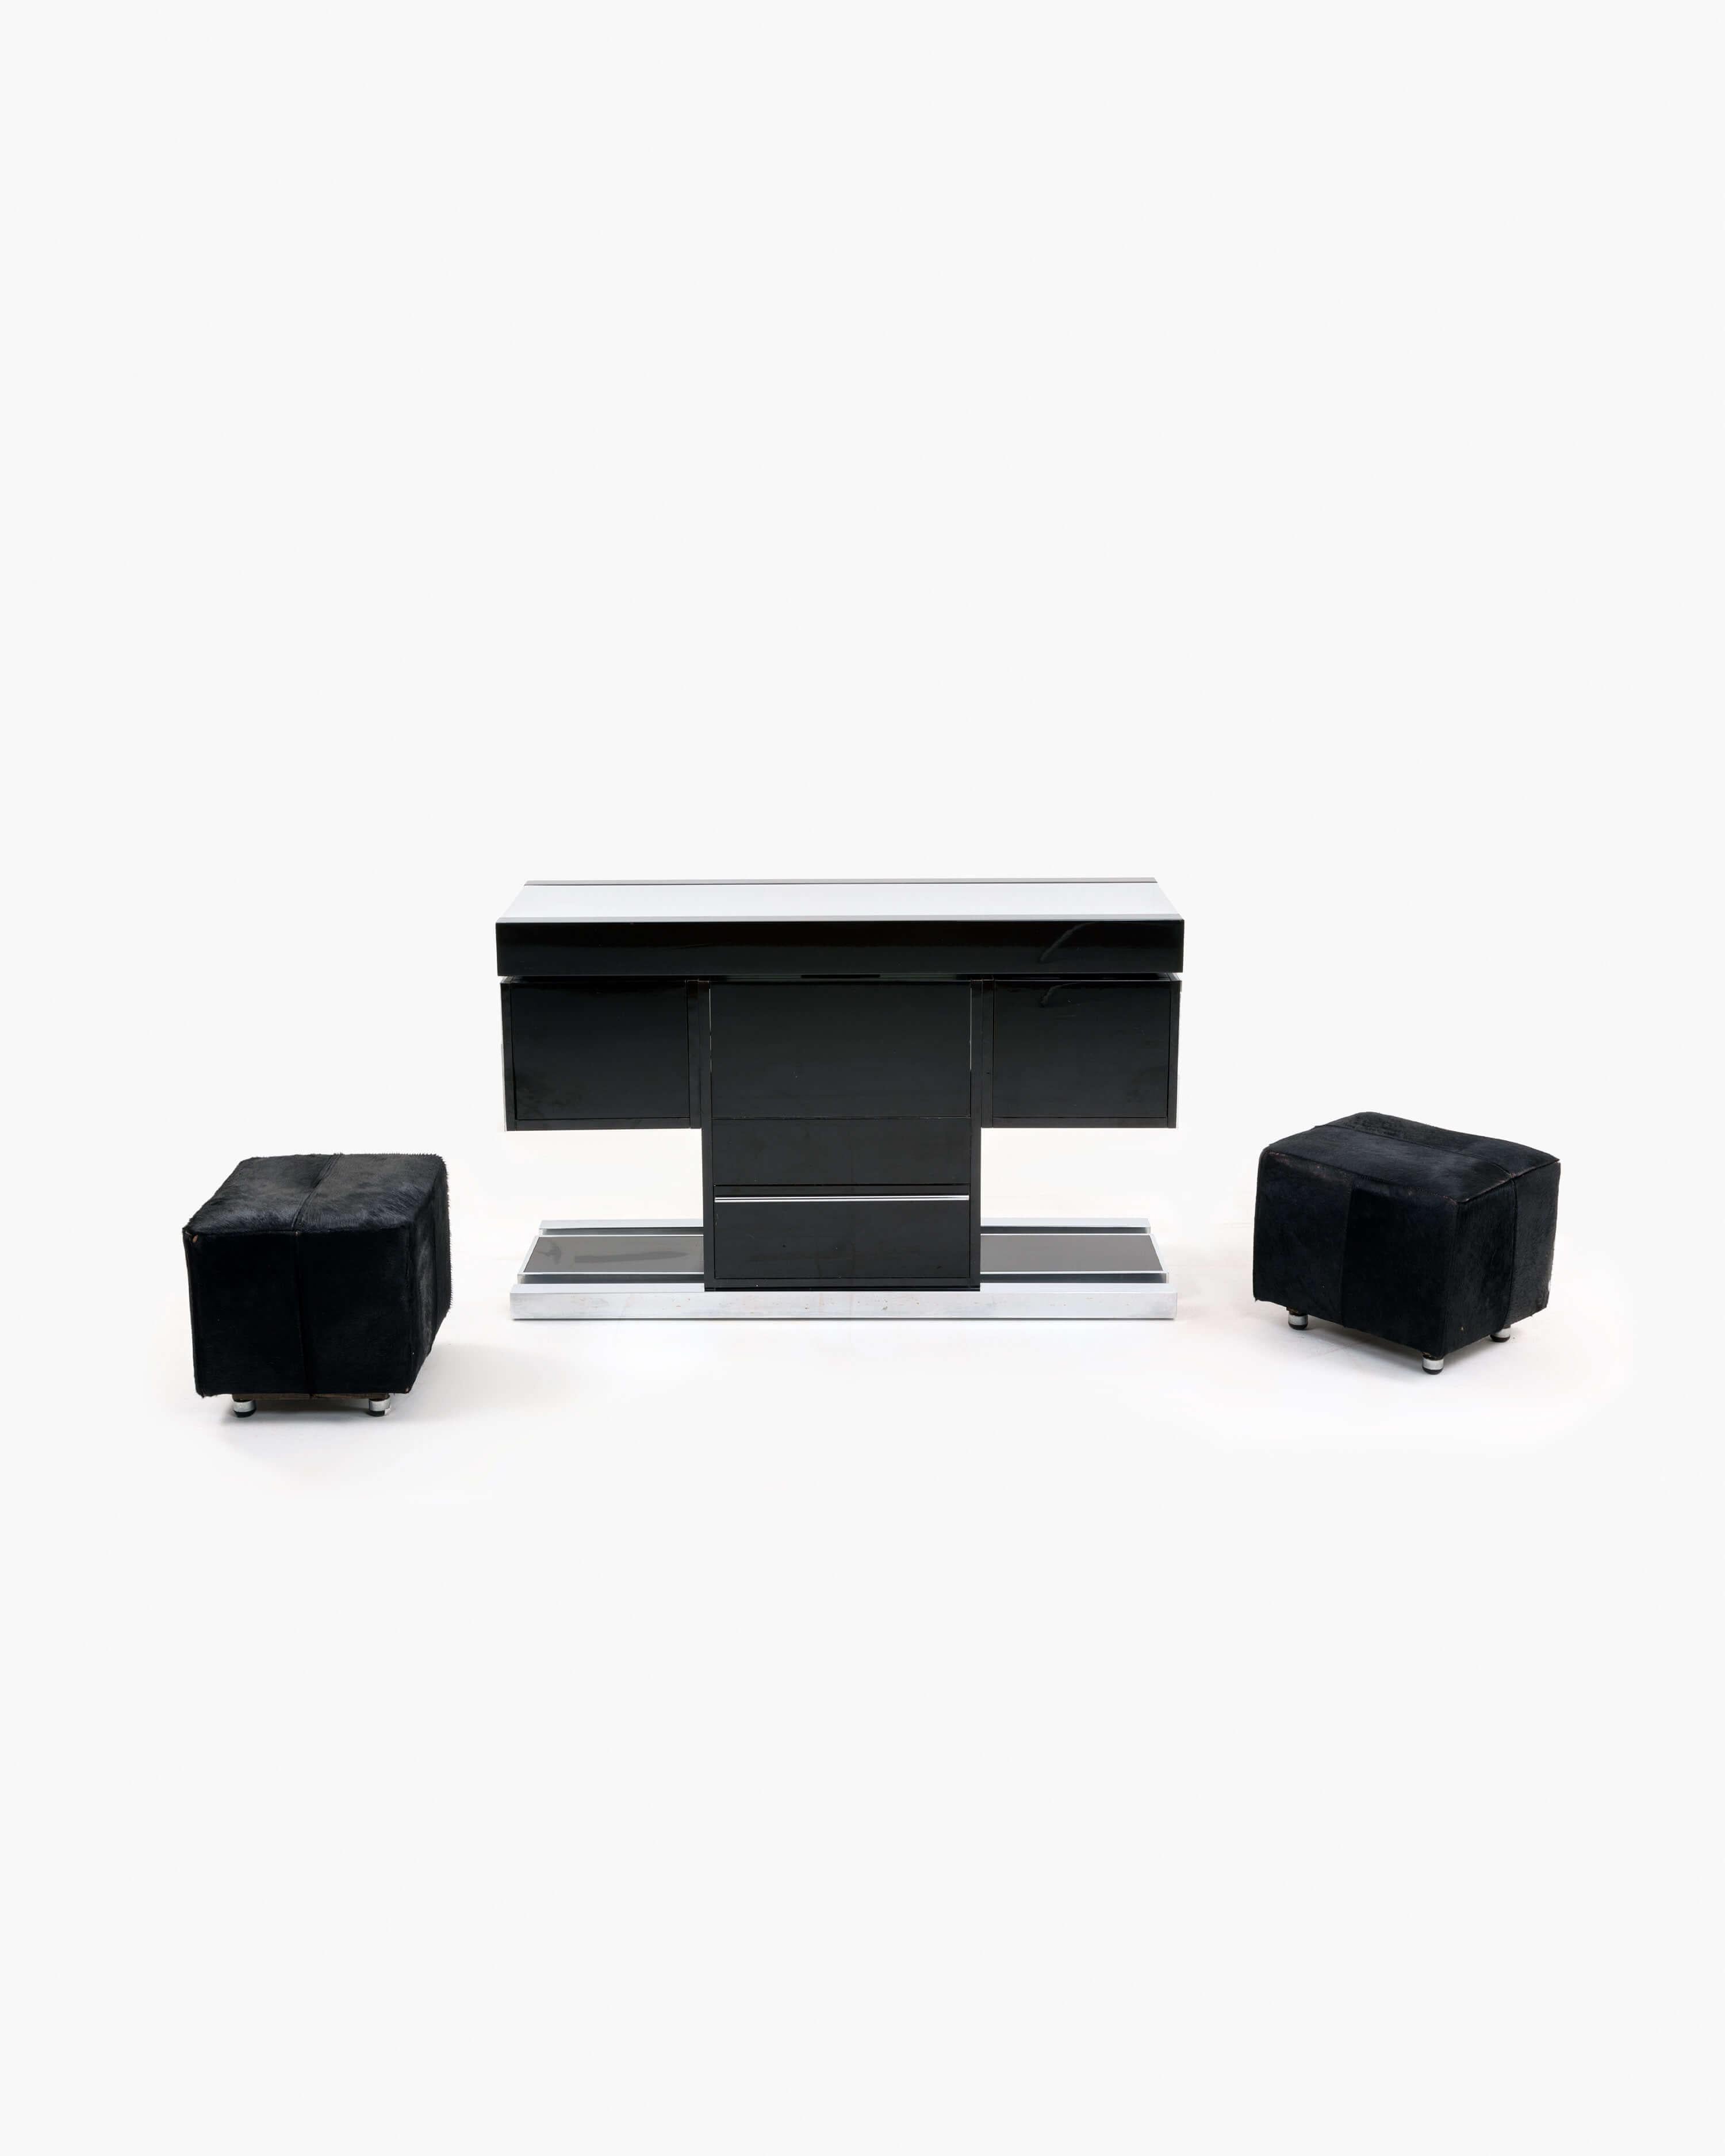 We are thrilled to present our exquisite Dry Bar Set, meticulously crafted in the style of the renowned Willy Rizzo, circa 1970, and preserved in its original condition. This exceptional piece showcases a sleek black lacquered finish with meticulous